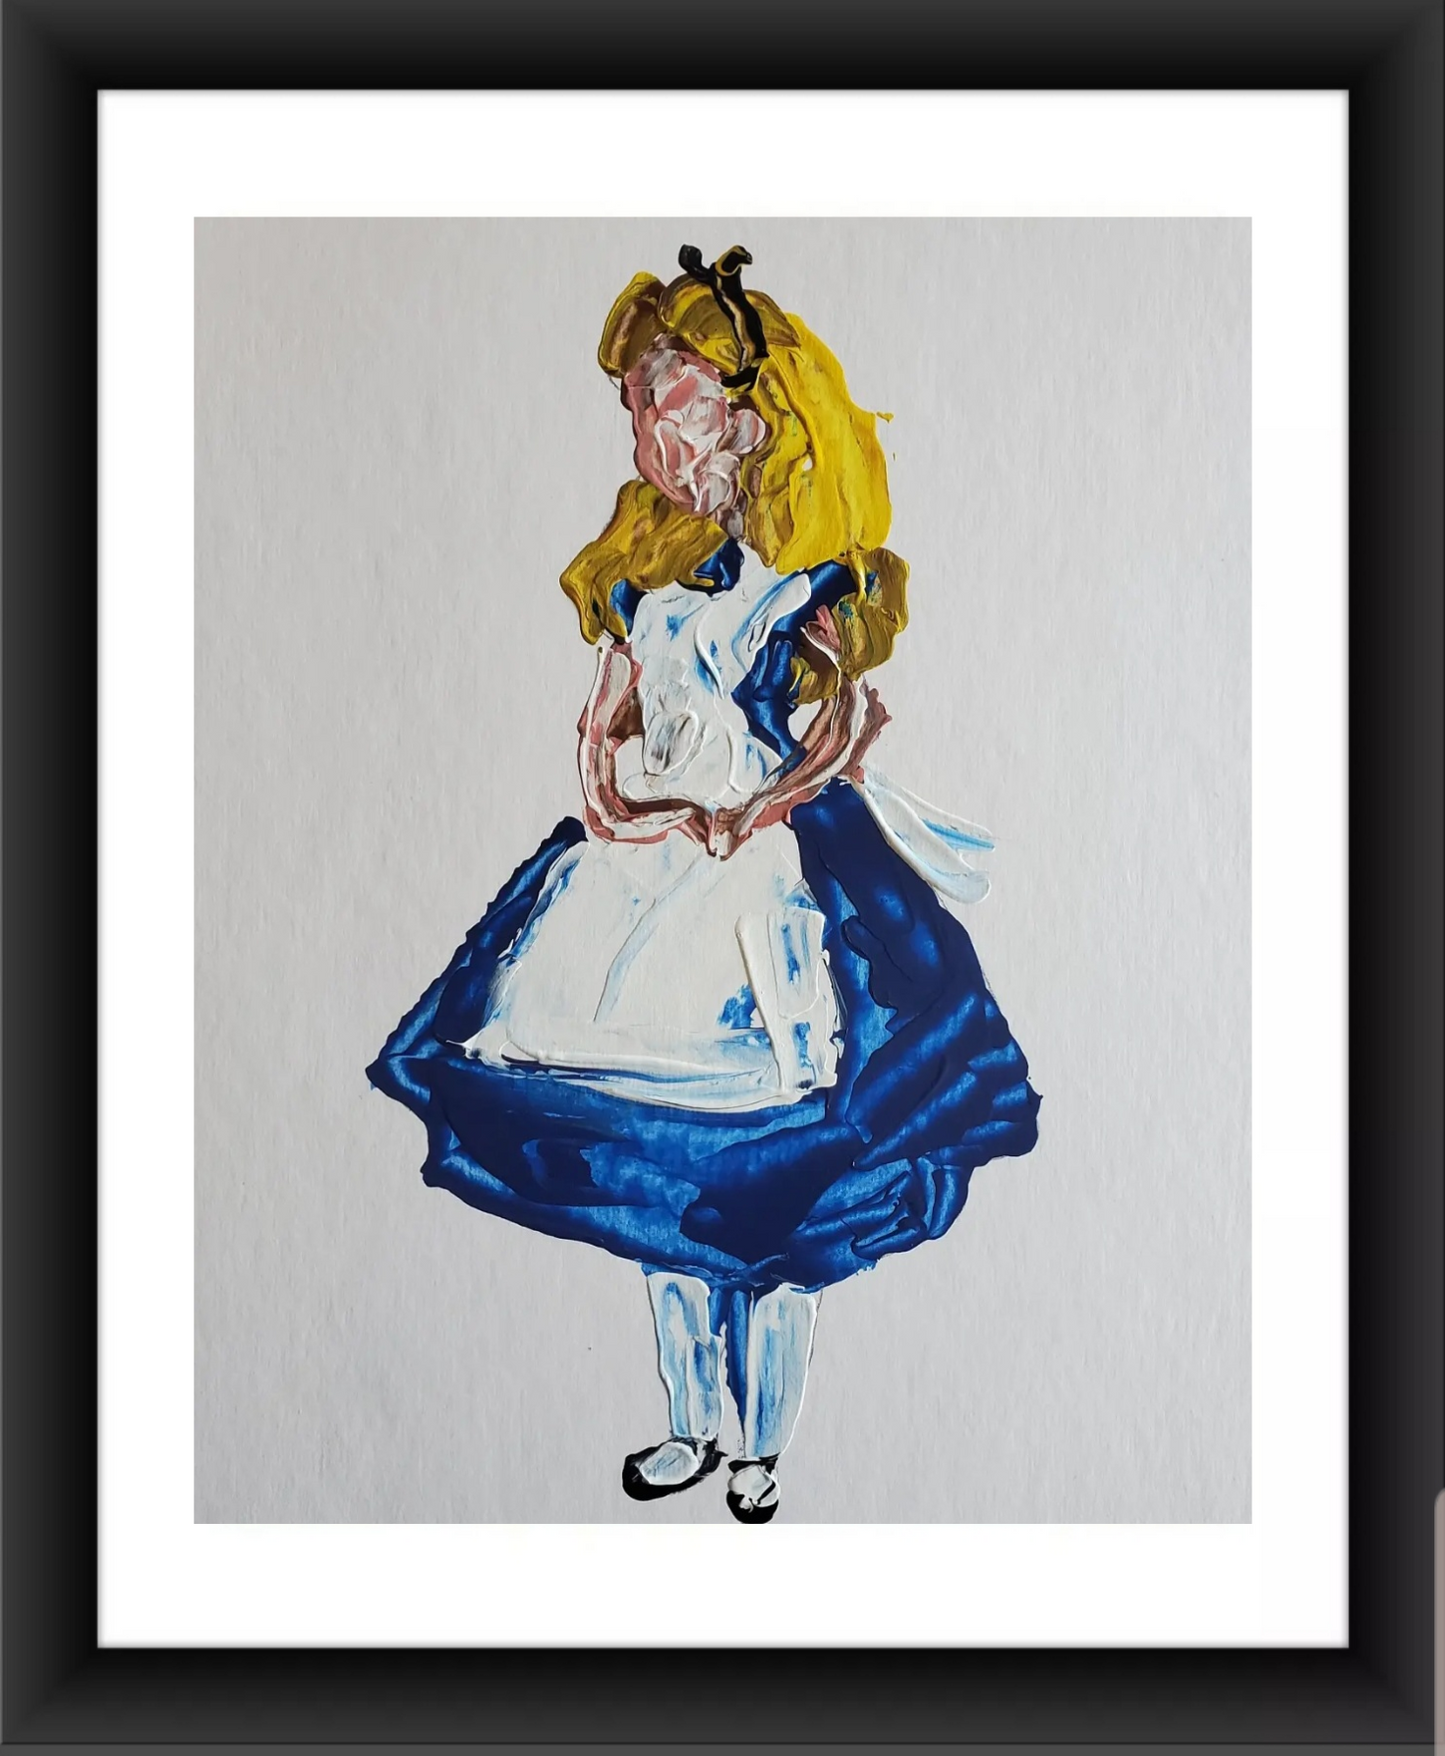 Alice in Wonderland Prints - 11x14 Unframed Wall Art Print Poster - Perfect  Alice in Wonderland Gifts and Decorations (Alice Trying to Play Croquet)